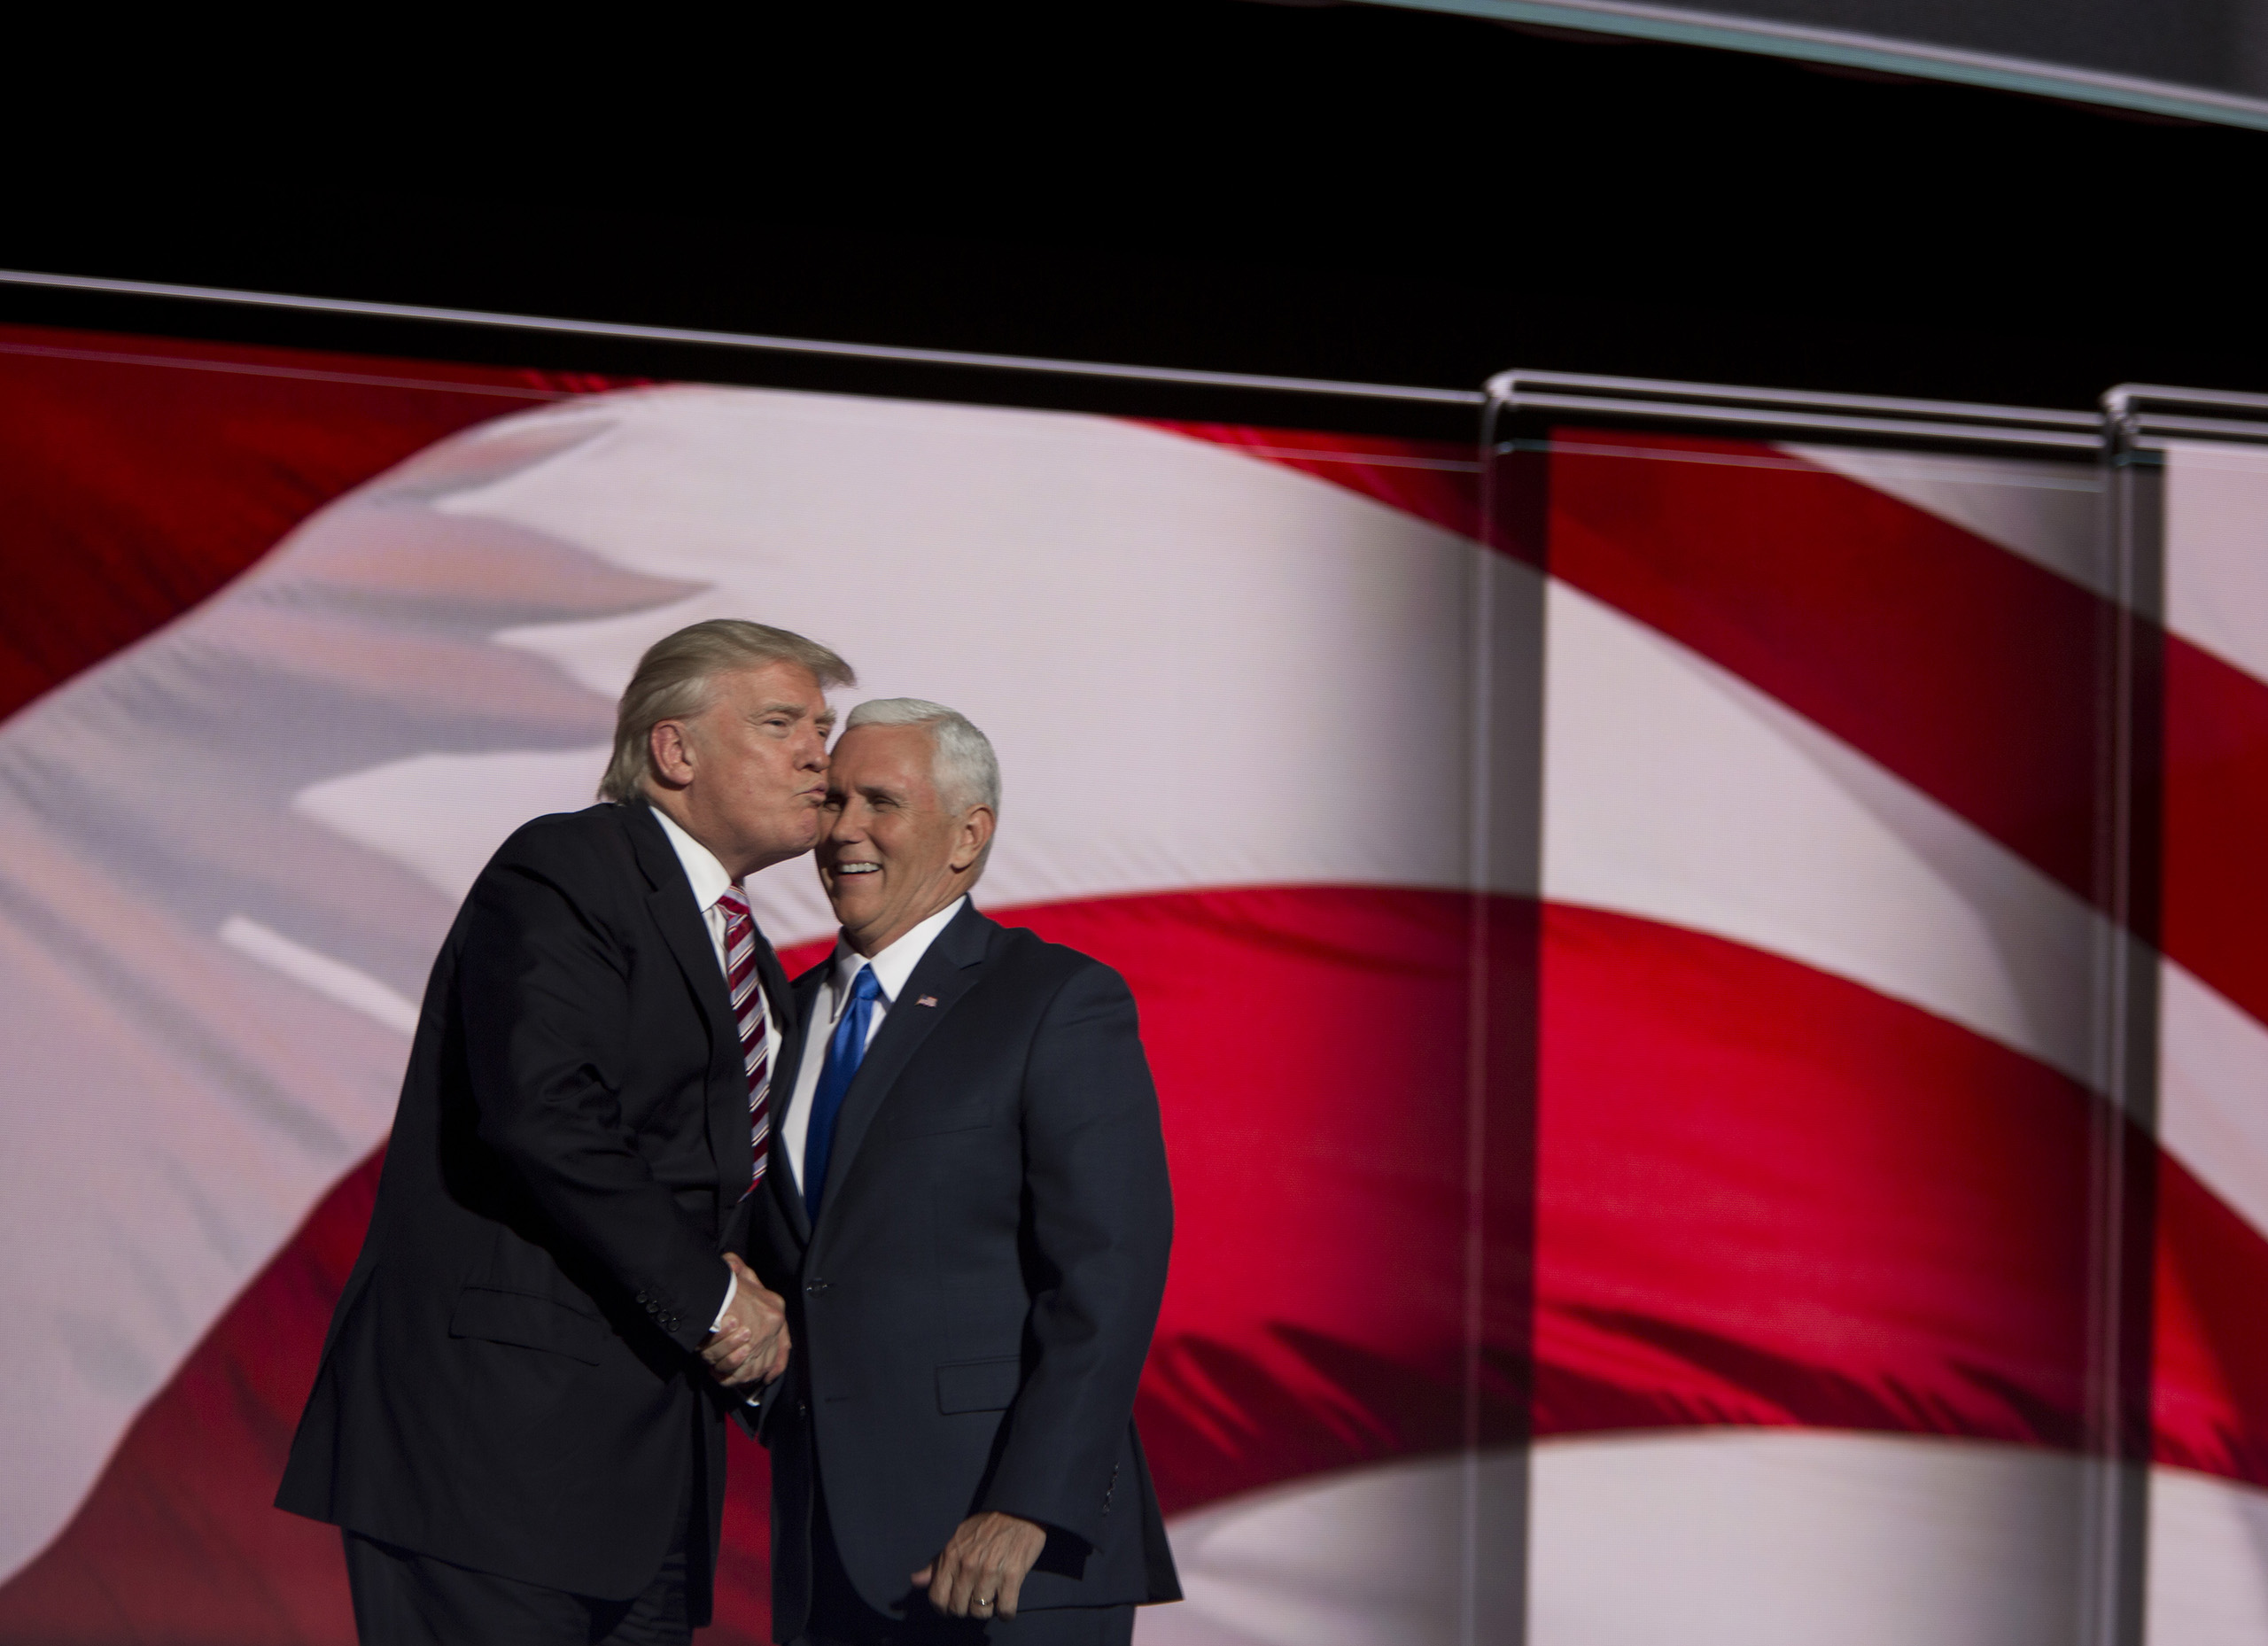 Republican presidential candidate Donald Trump congratulates Republican vice presidential candidate Mike Pence after he delivered a speech on the third day of the Republican National Convention on July 20, 2016 at the Quicken Loans Arena in Cleveland, Ohio.